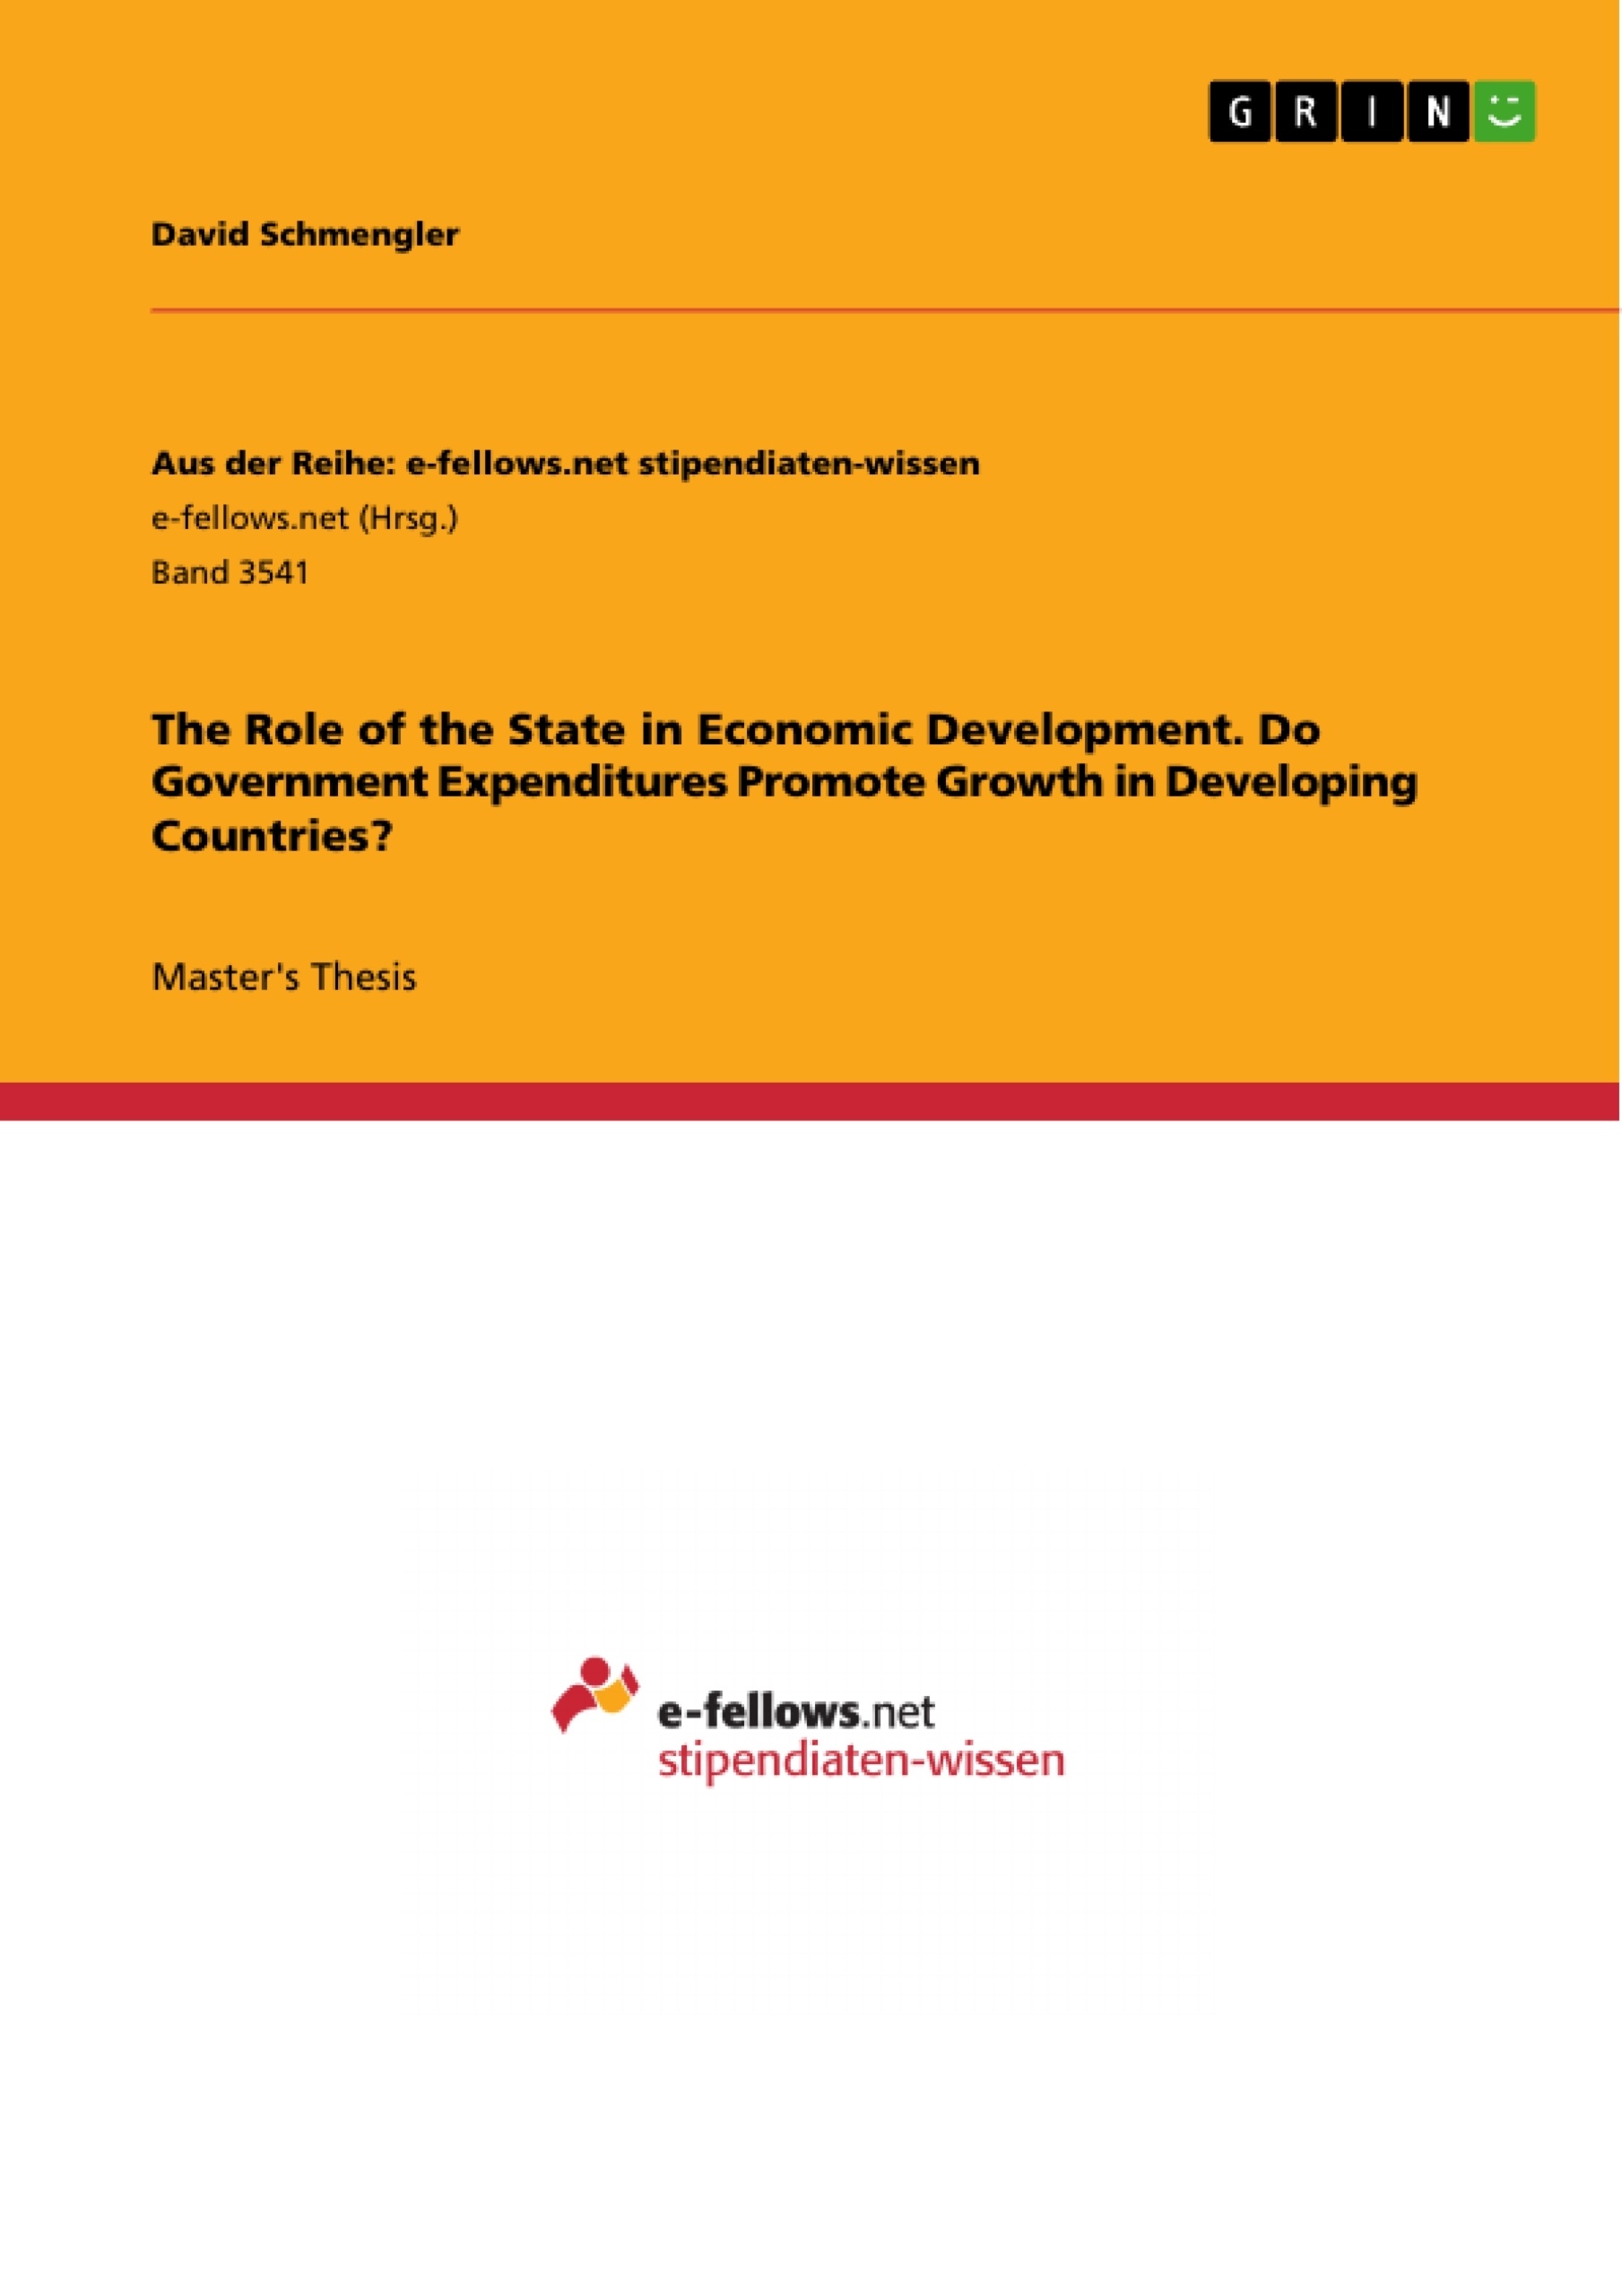 Titre: The Role of the State in Economic Development. Do Government Expenditures Promote Growth in Developing Countries?